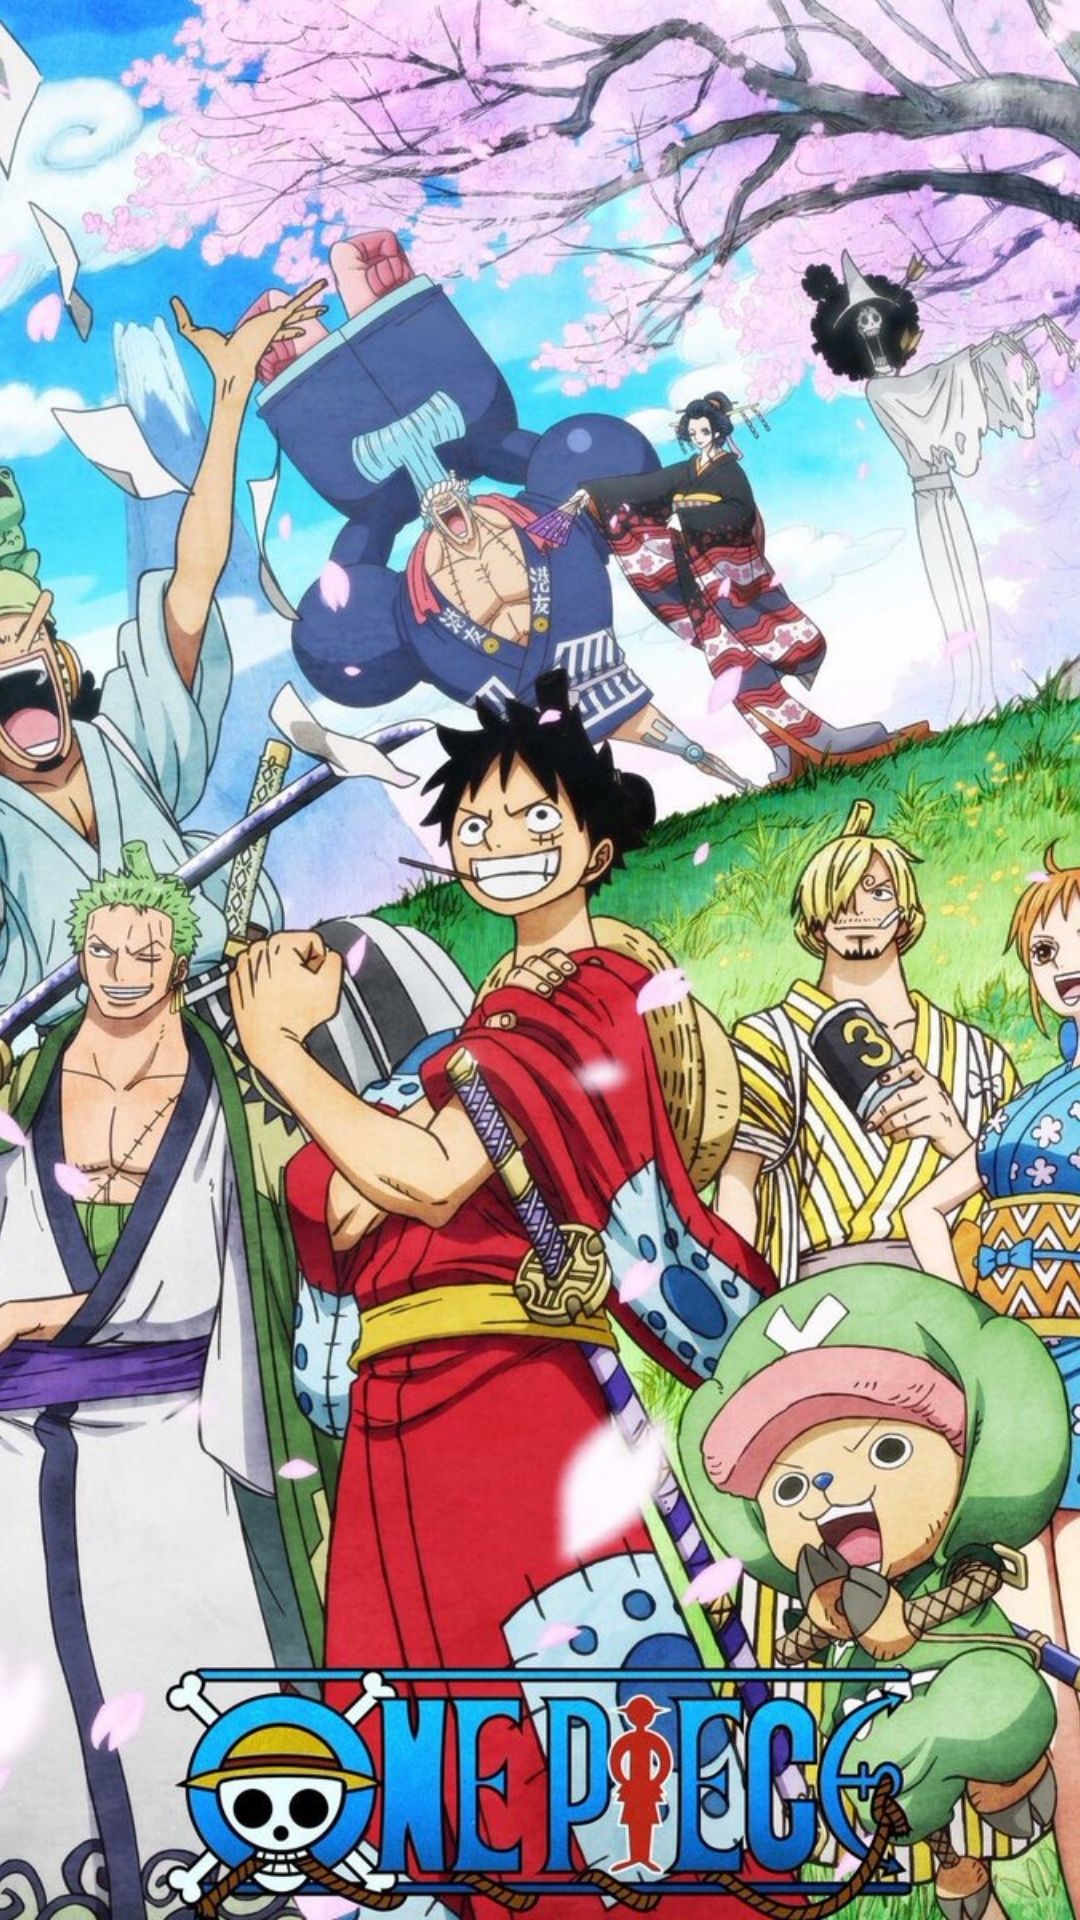 One Piece Anime S Episode 957 Dissolves The Seven Warlords